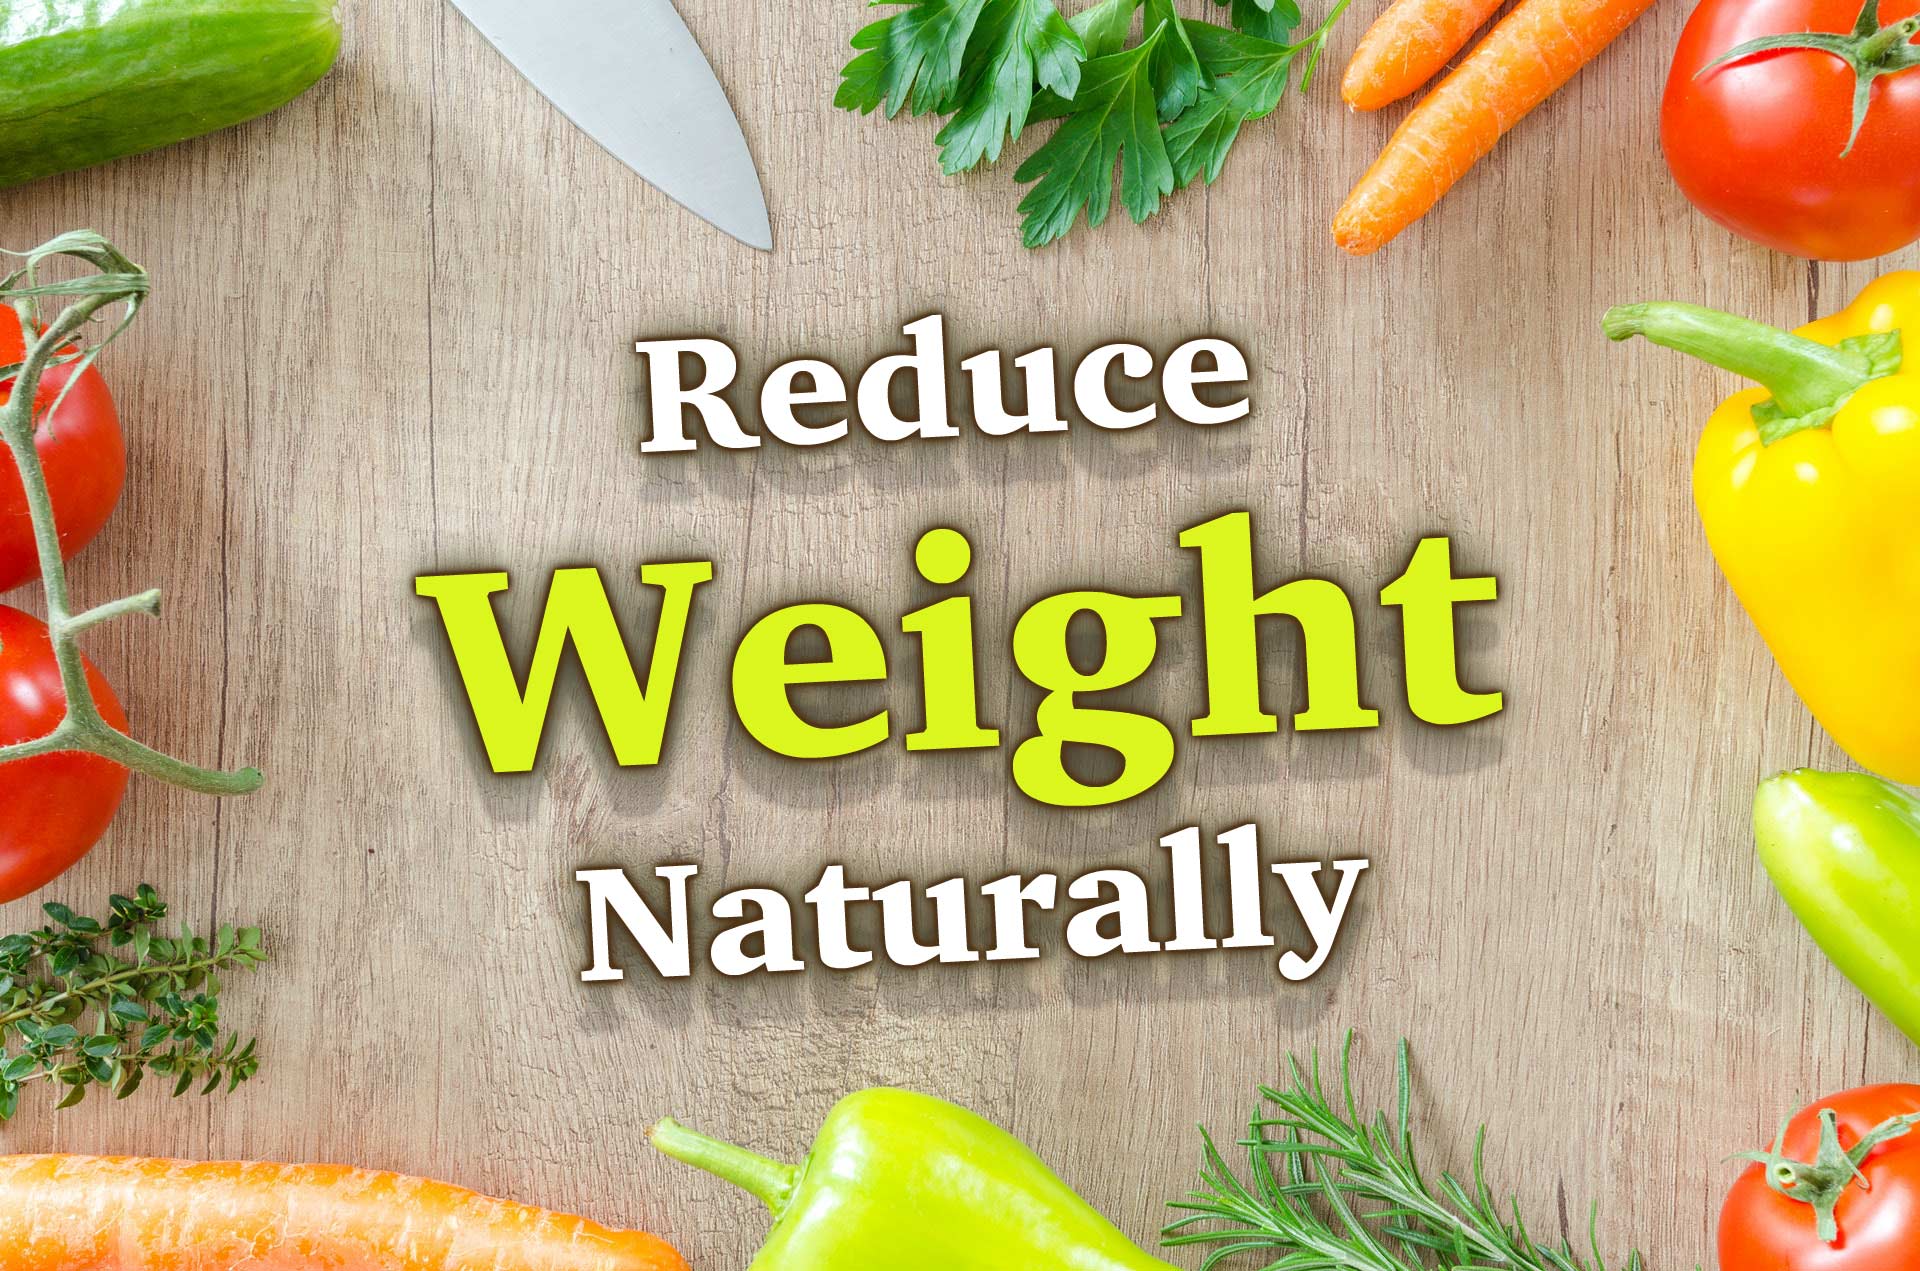 How To Reduce Weight Naturally: A Helpful Insight For Promising Results